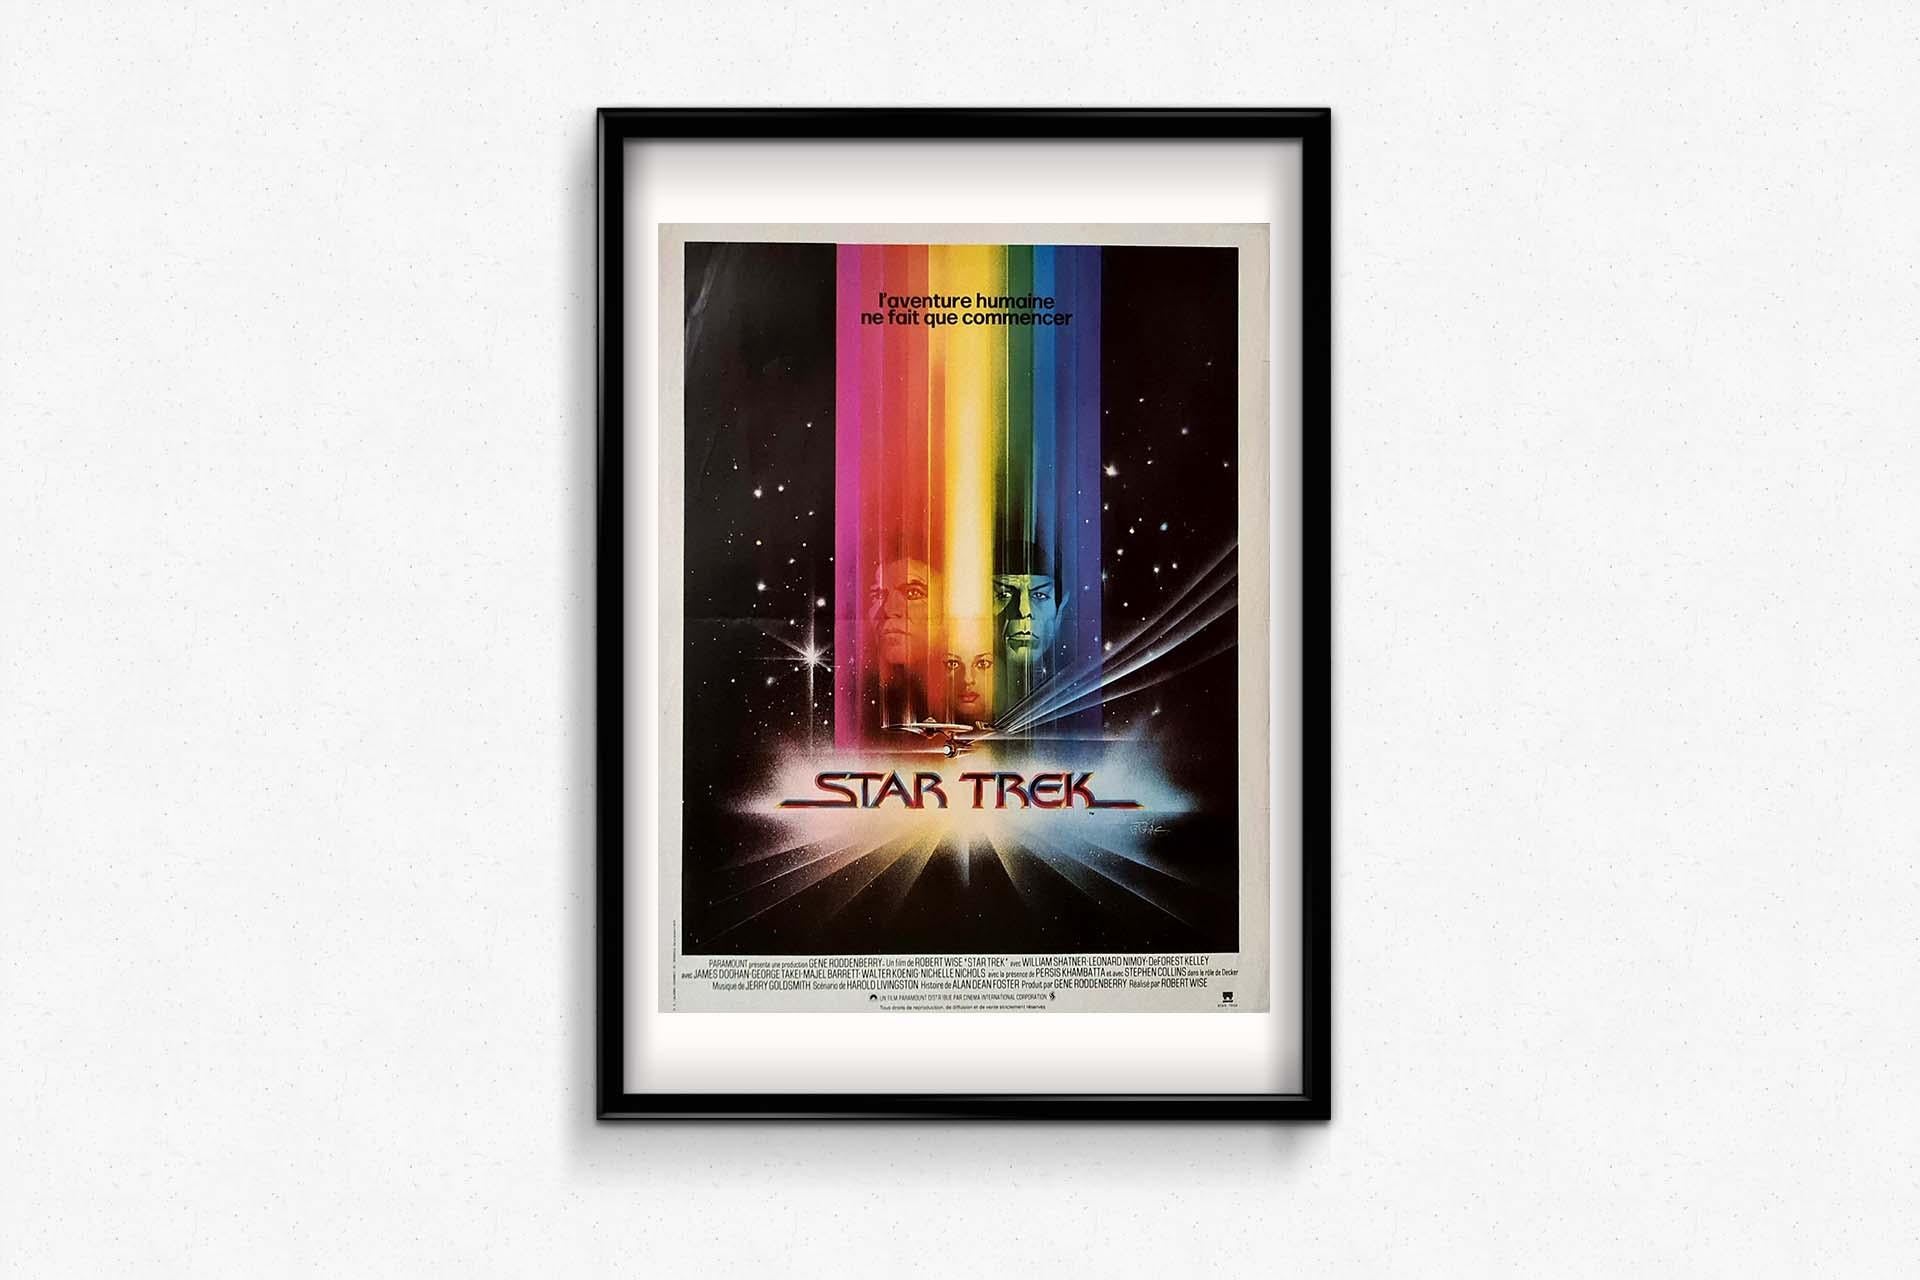 Original poster by Bob Peak for the Star Trek saga.
Since its first adaptation in 1979, it has changed several times of crews and styles. Some parts focus on adventure, others on comedy or philosophy. Each opus is different from the previous ones,